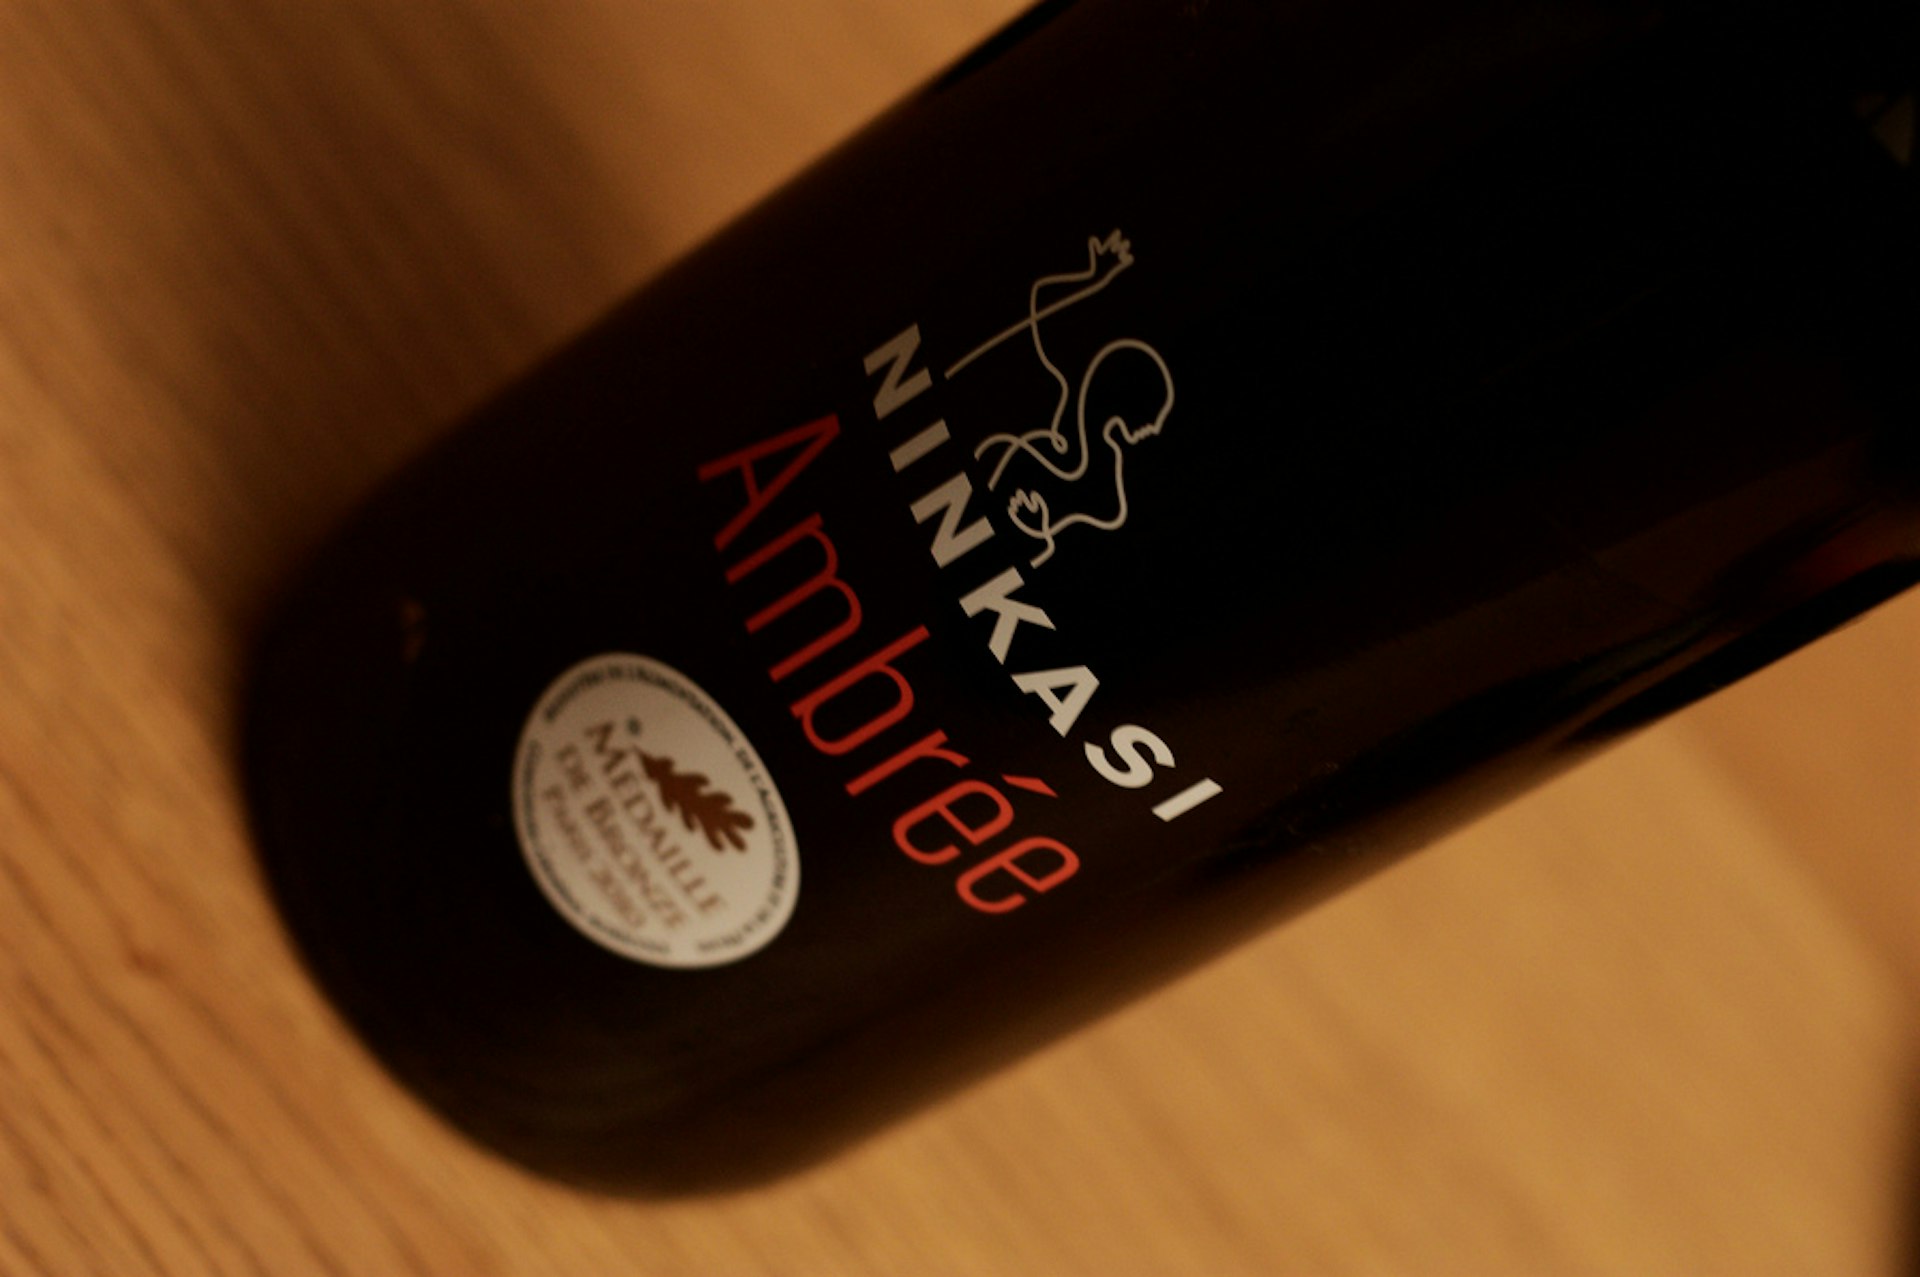 Ninkasi's ambrée is a rich, malty amber. Image by Pierre Guinoiseau / CC BY 2.0